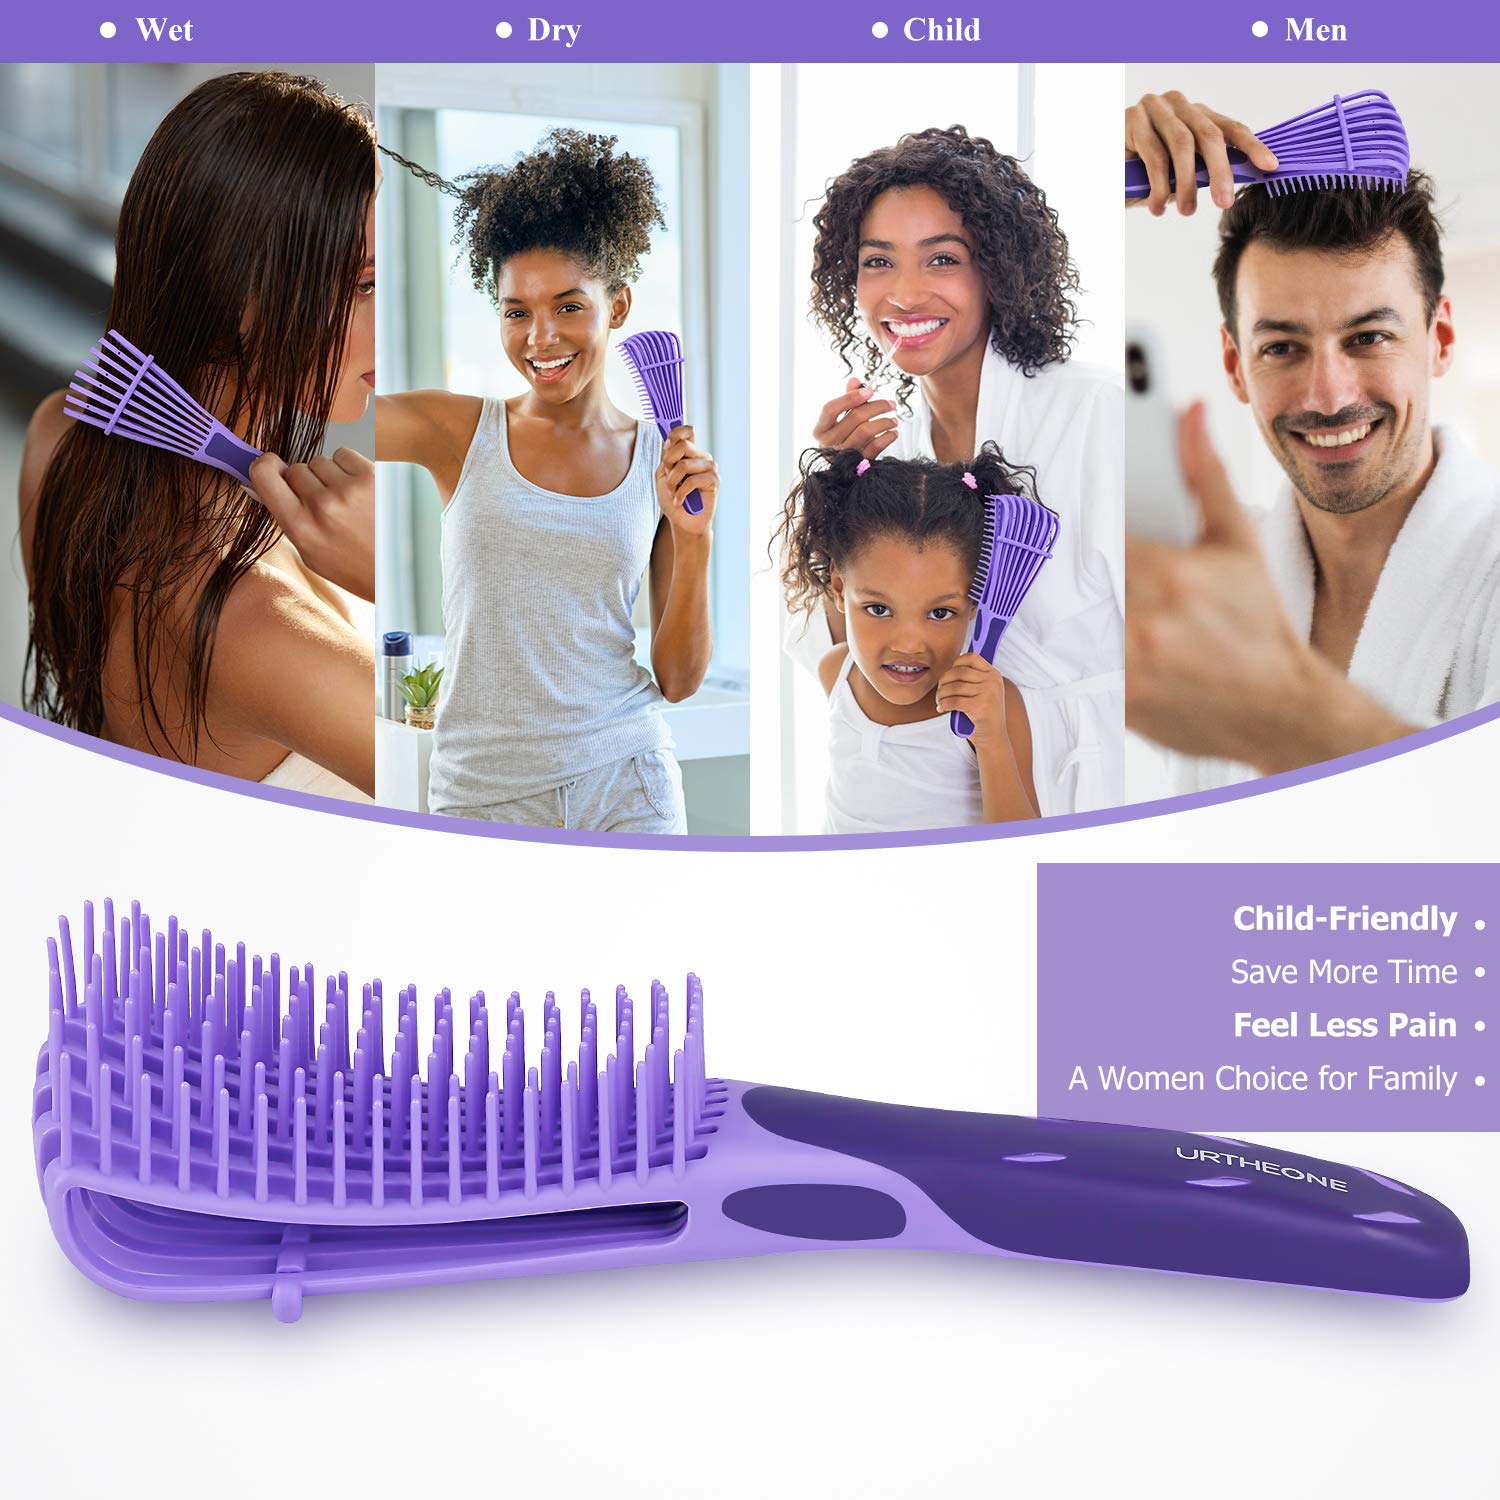 Detangling Hair Brush, Detangling brush for Adults and Kids, Comb Set for Kinky Curly Coily and Wavy Hair, For Wet and Dry Hair, Afro American Type 3a-4c, Comfortable Grip(Purple)